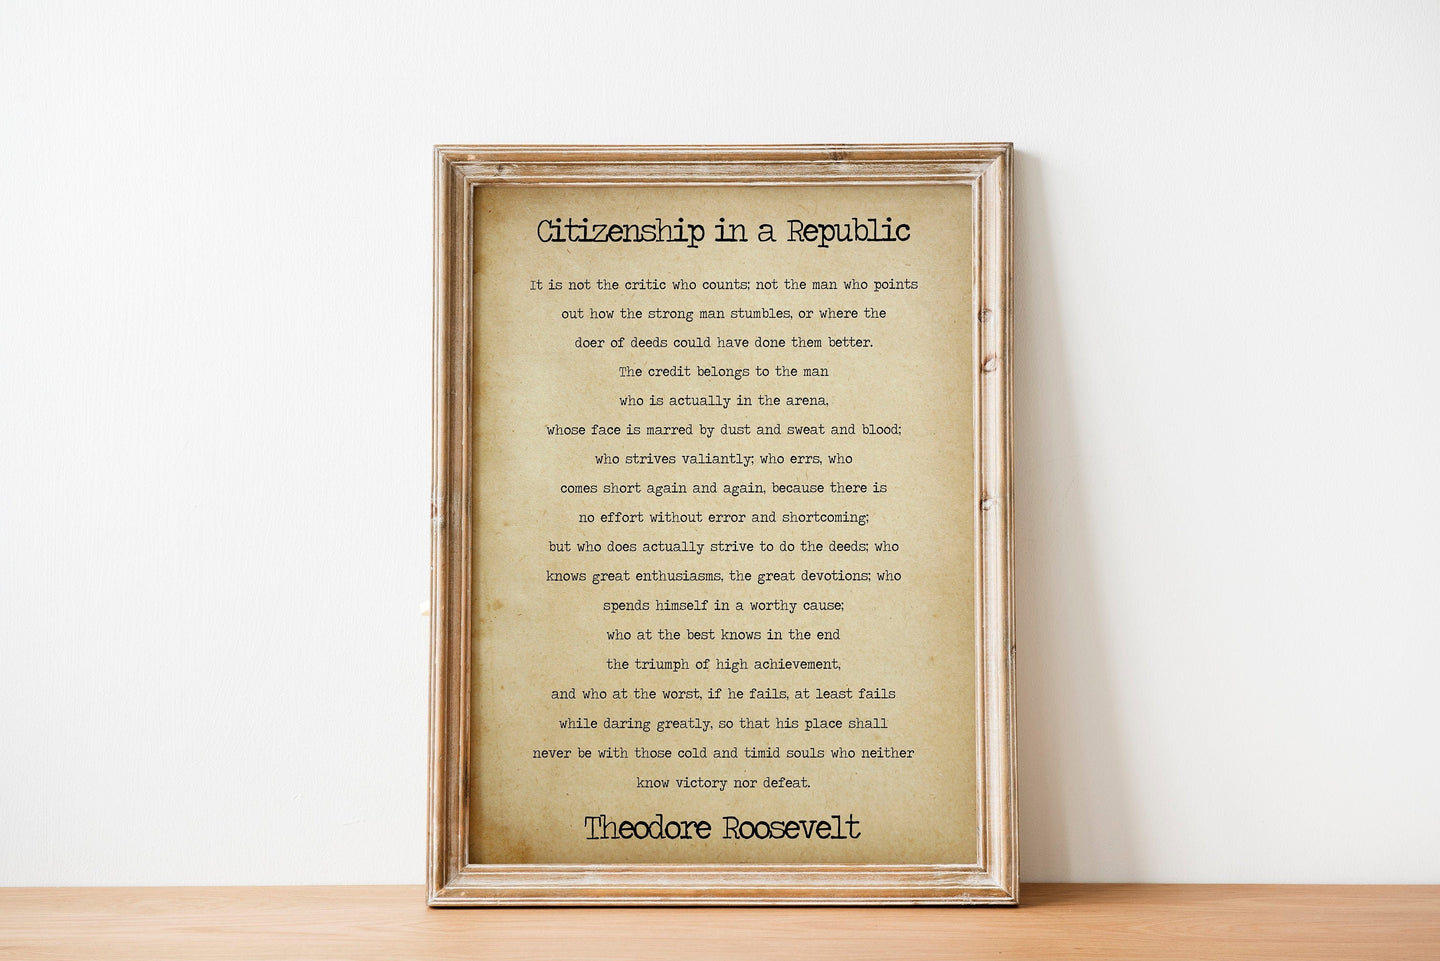 Theodore Roosevelt Citizenship in a Republic speech - The Man in the Arena - unframed office decor print - political art motivational quotes